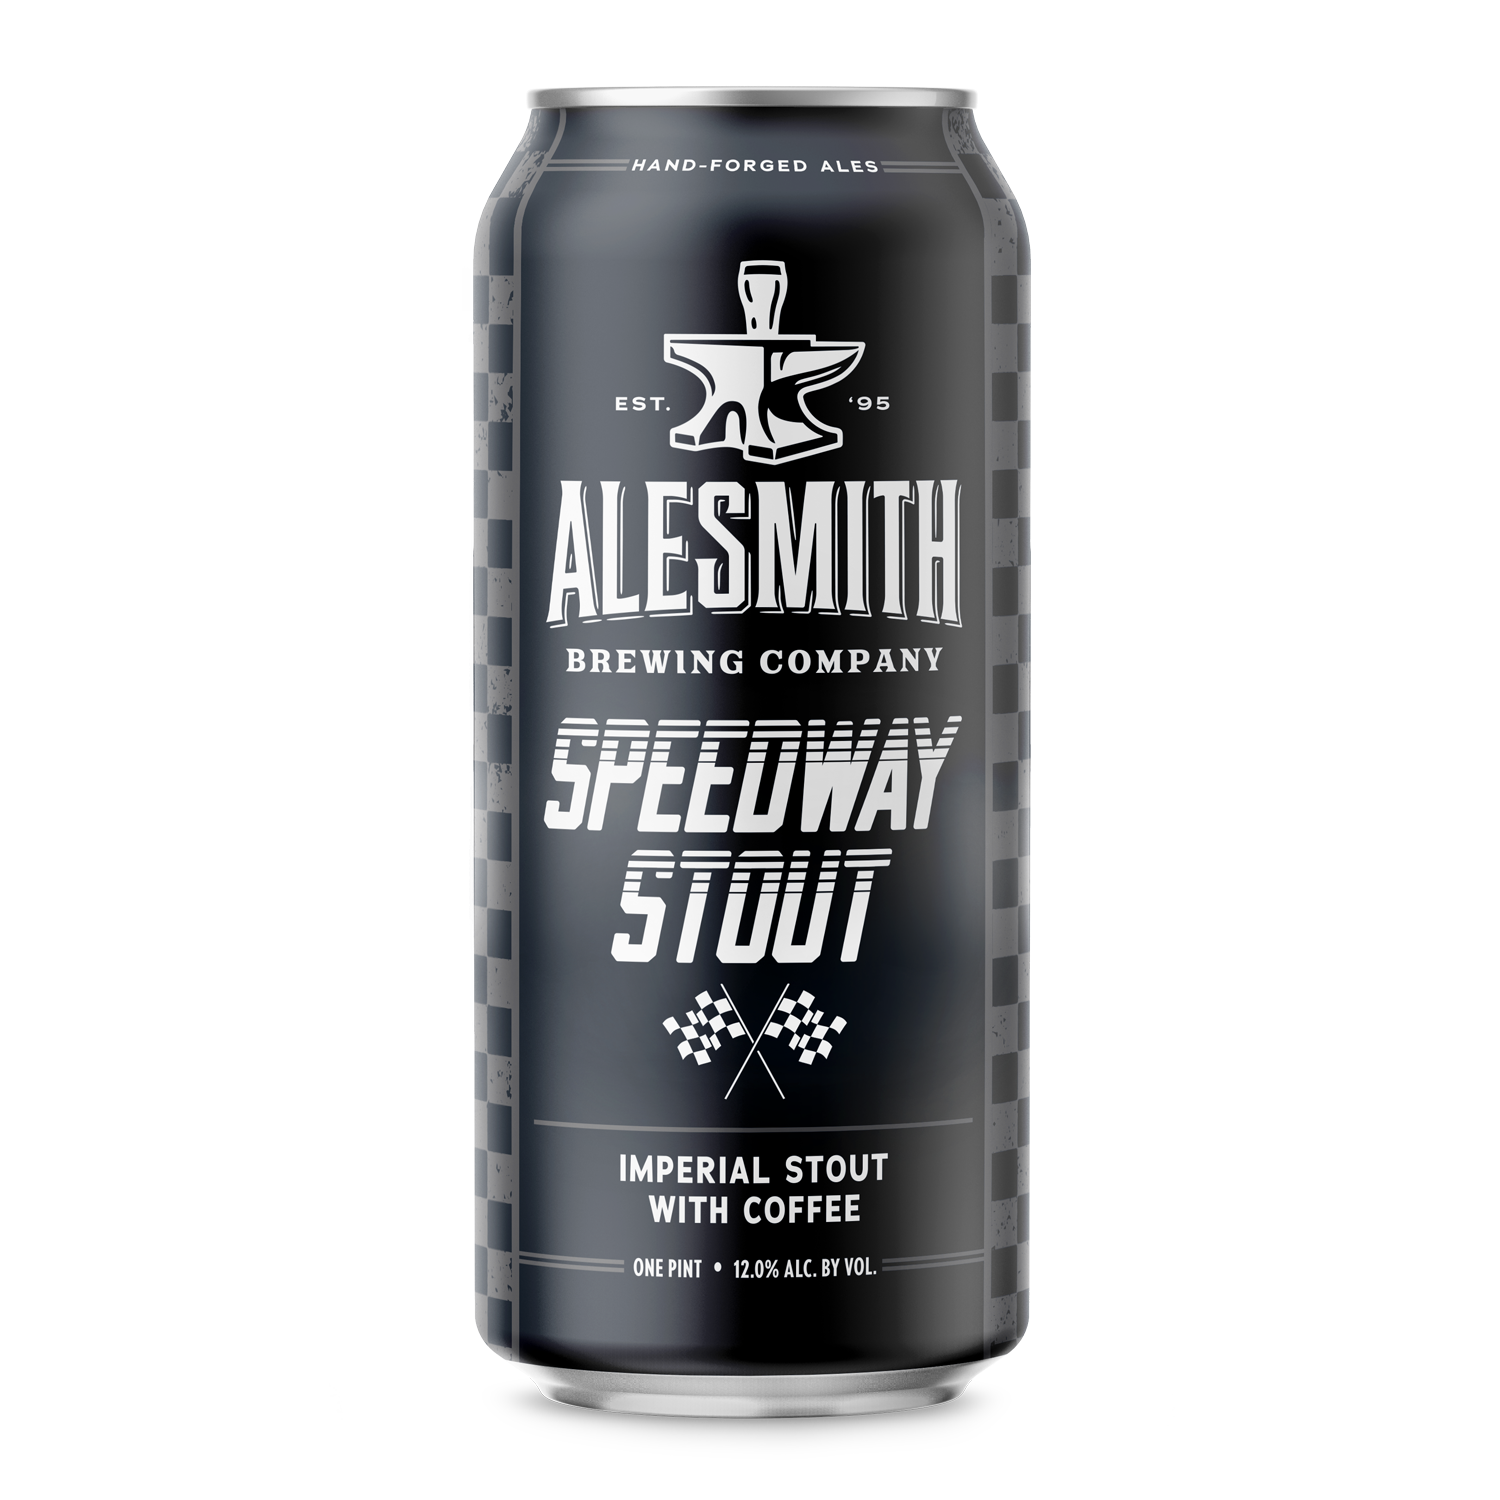 Speedway Stout (12% ABV) 16oz Cans - AleSmith Brewing Co.